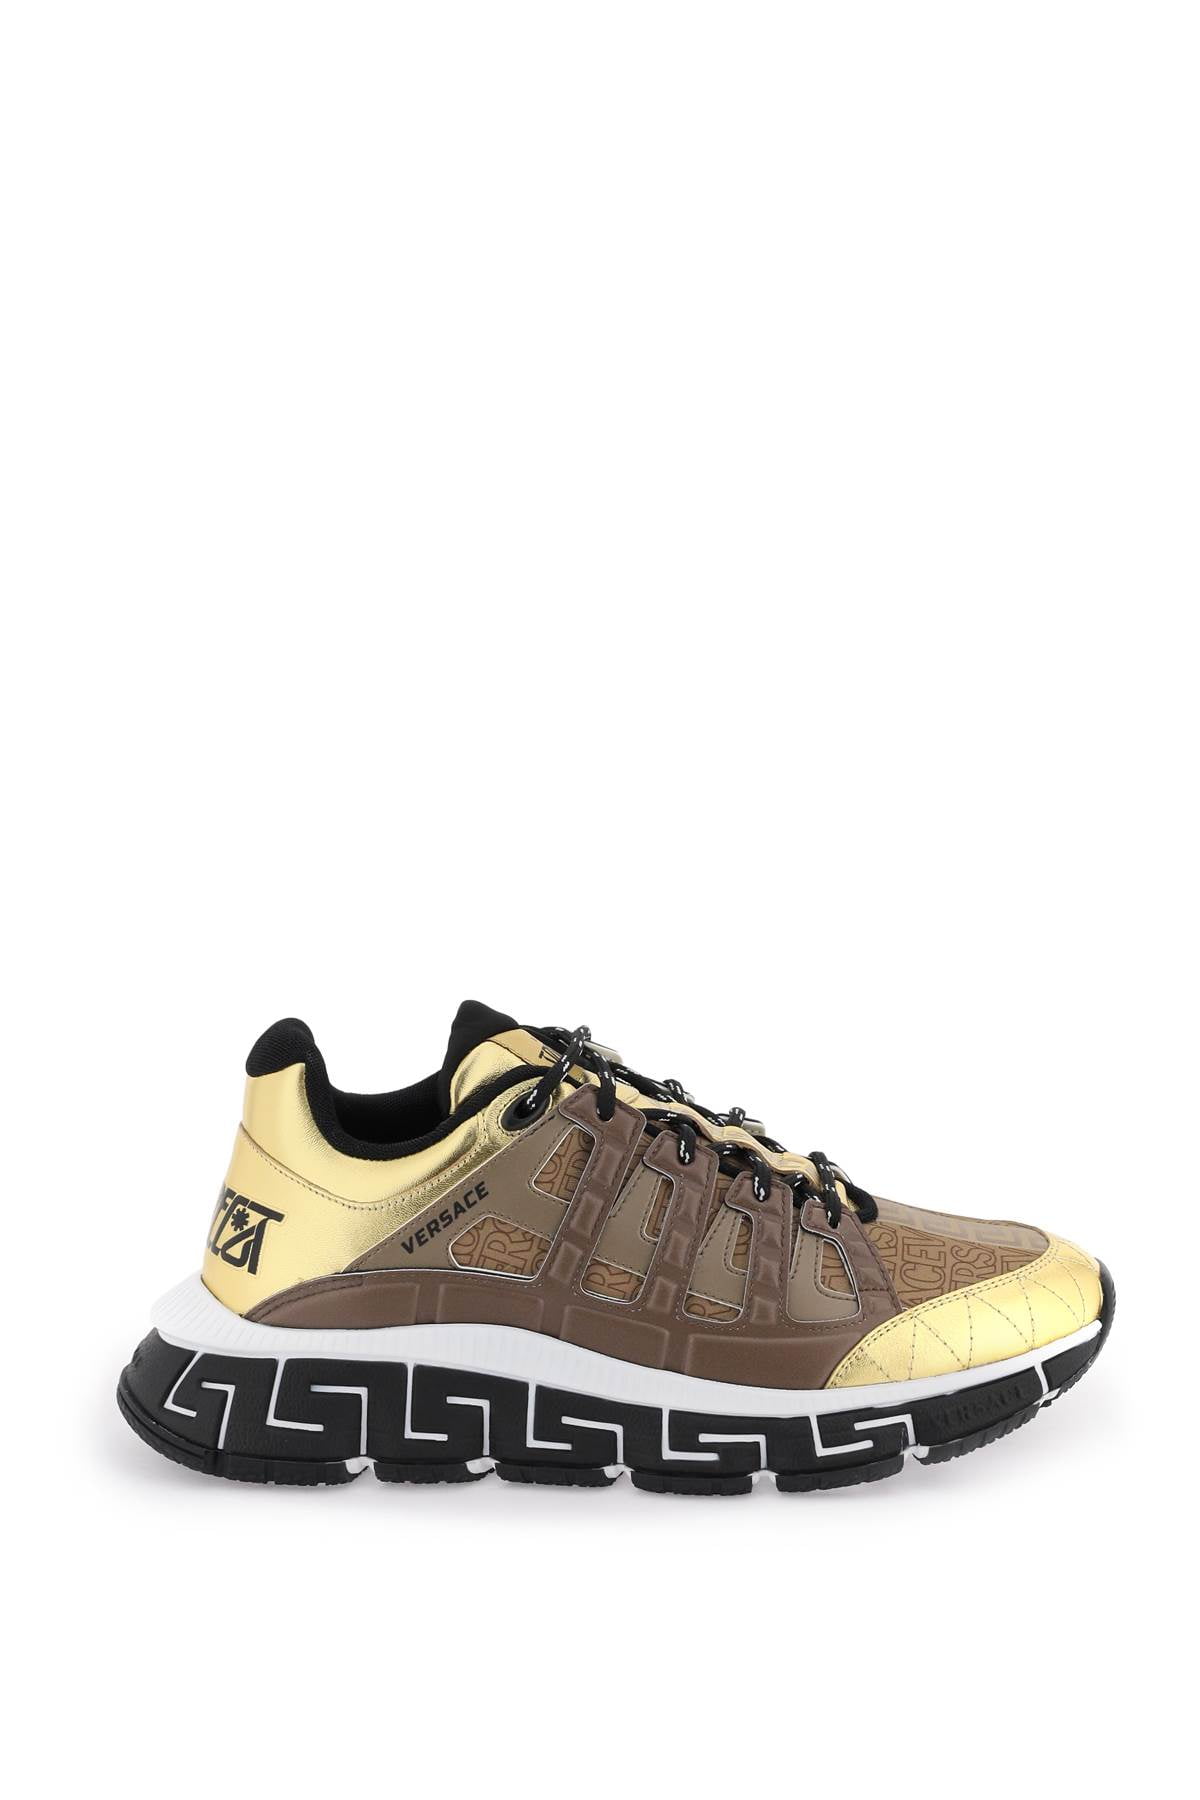 Versace Chain Reaction sneakers for Men - Multicolored in KSA | Level Shoes